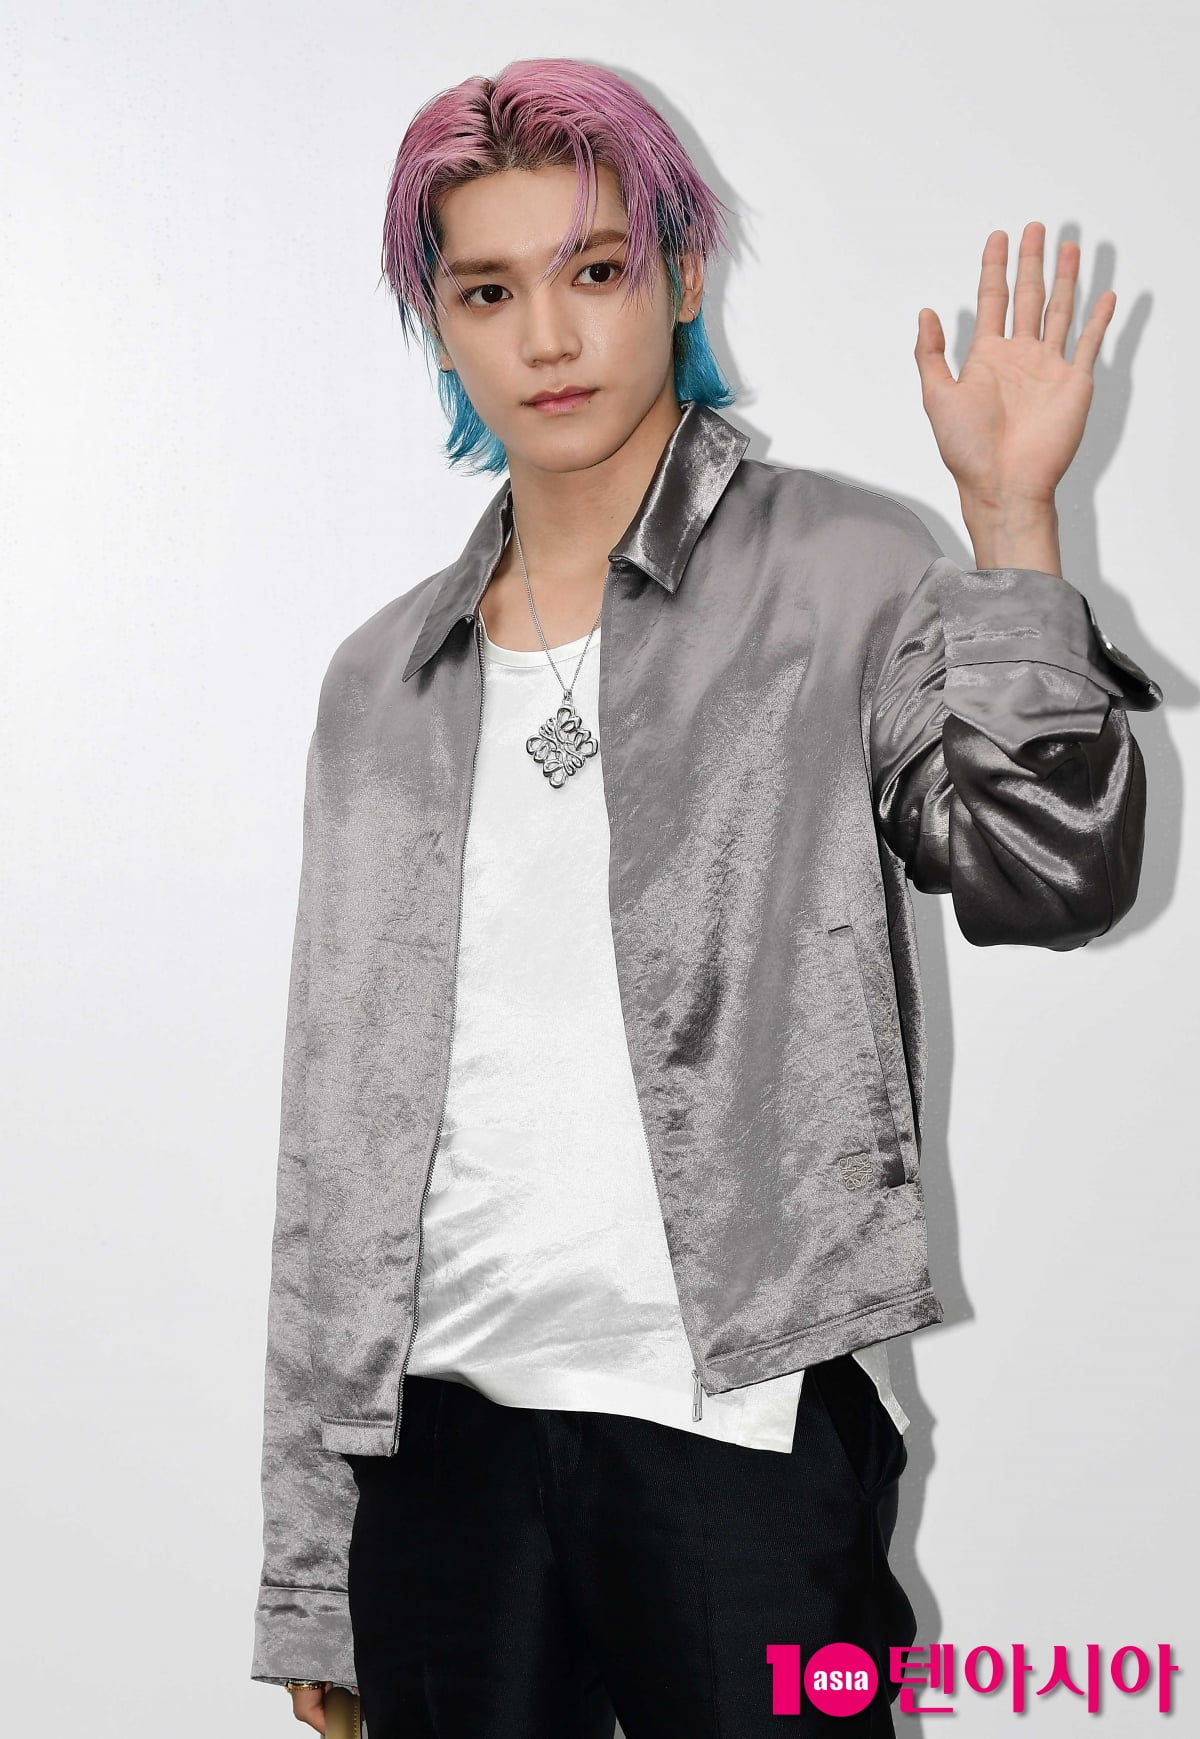 NCT Taeyong, the visual of a man tearing out of a cartoon...cool 